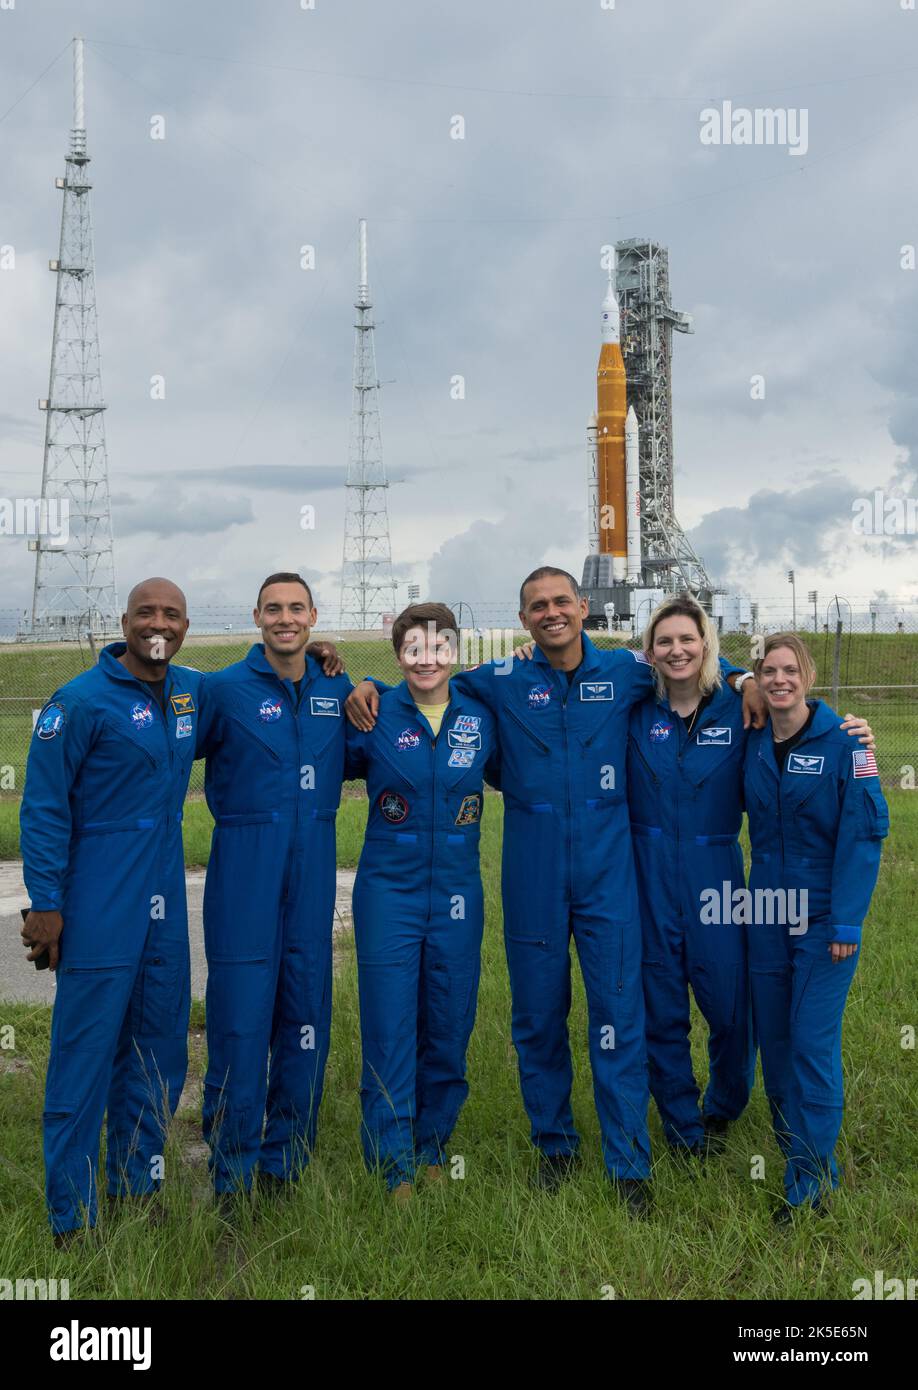 NASA astronauts and astronaut candidates pose for a photograph in front of NASA’s Artemis I Space Launch System and Orion spacecraft atop the mobile launcher on the pad at Launch Complex 39B at the agency’s Kennedy Space Center in Florida on Sept. 2, 2022. The astronauts are, from left to right: Victor Glover, NASA astronaut; Marcos Berrios, NASA astronaut candidate; Anne McClain, NASA astronaut; Anil Menon and Deniz Burnham, NASA astronaut candidates; and Zena Cardman, NASA astronaut. The first in a series of increasingly complex missions, Artemis I will provide a foundation for human deep sp Stock Photo